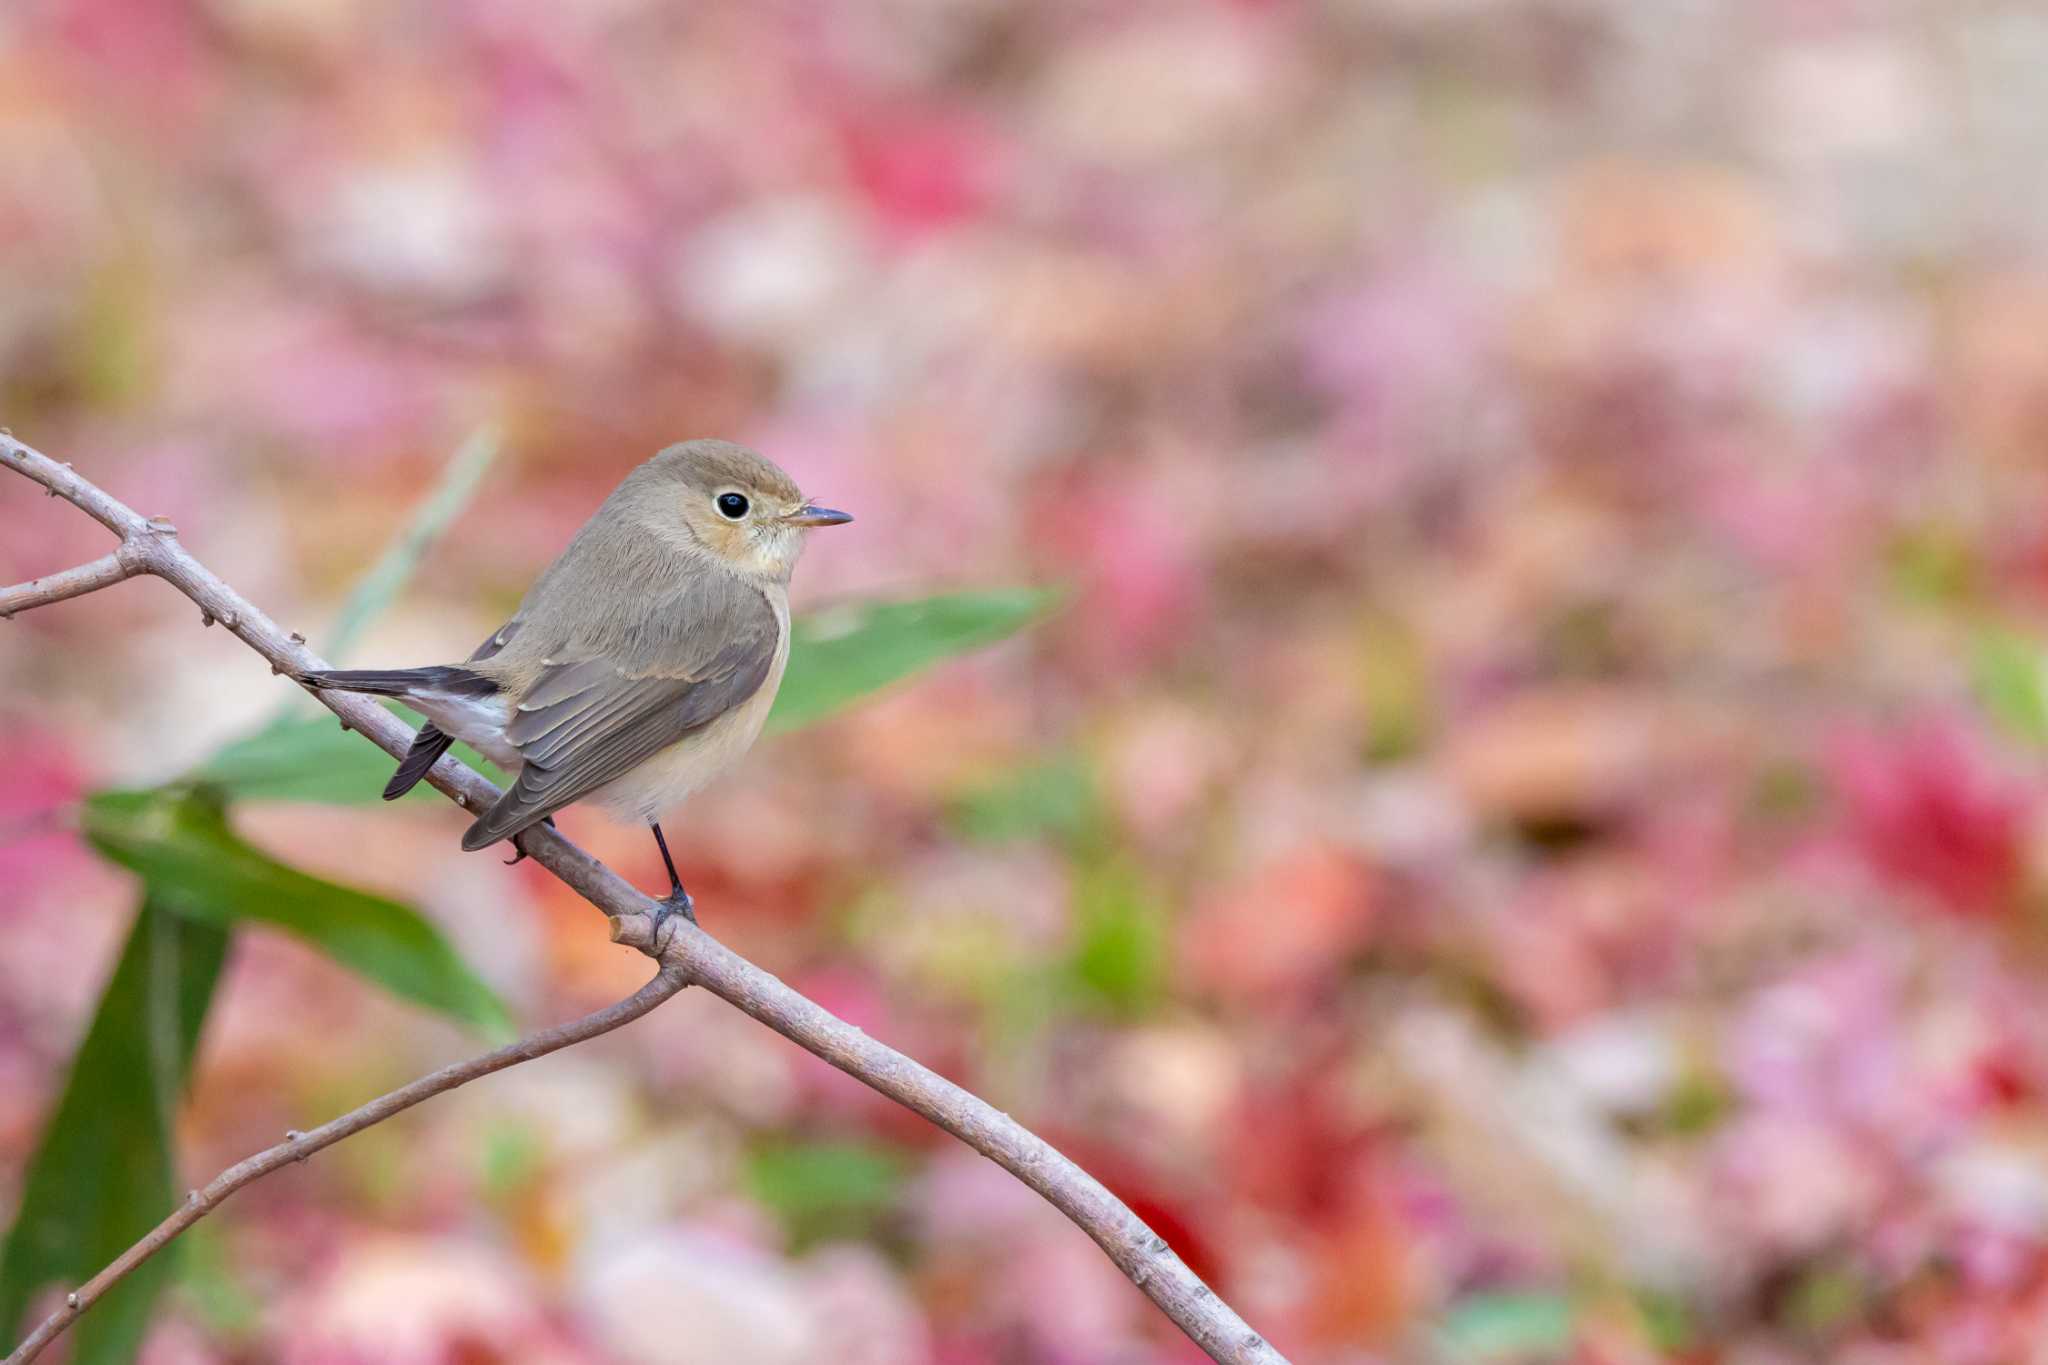 Photo of Taiga Flycatcher at 明石市魚住町 by ときのたまお